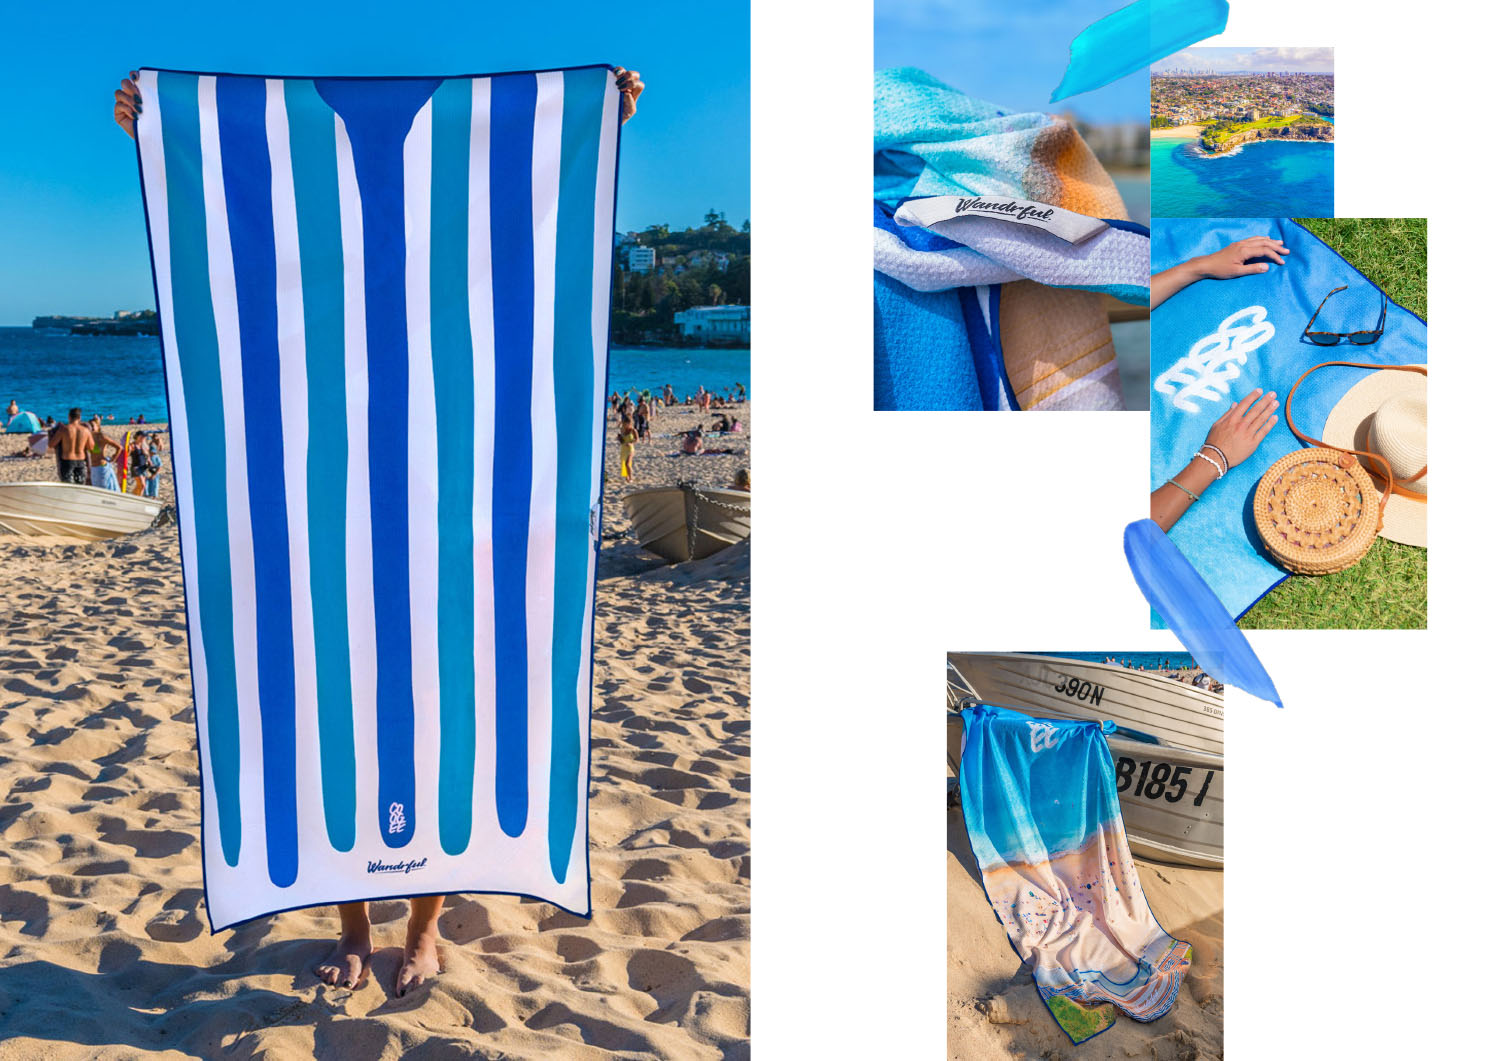 Wandrful sand-free beach towels at Coogee Beach. Model using sand-free beach towel.